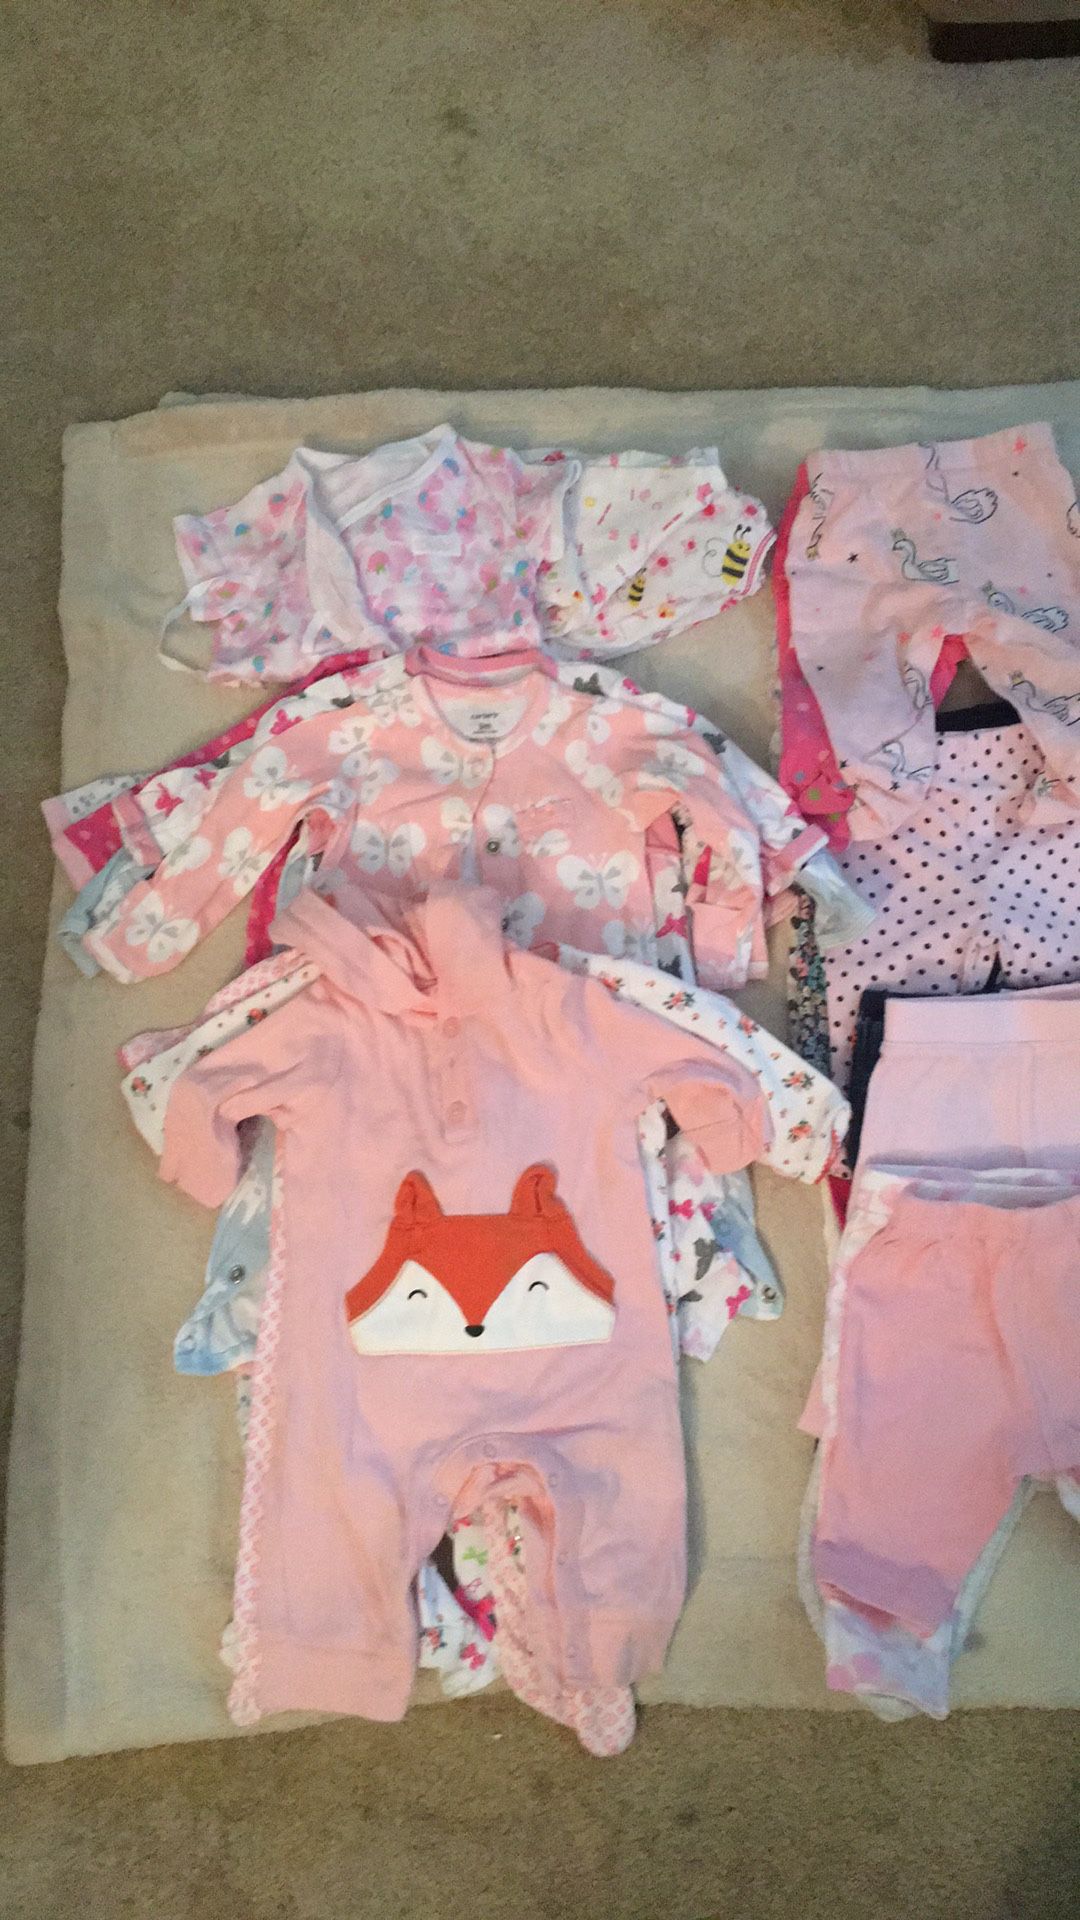 Baby’s girl clothes